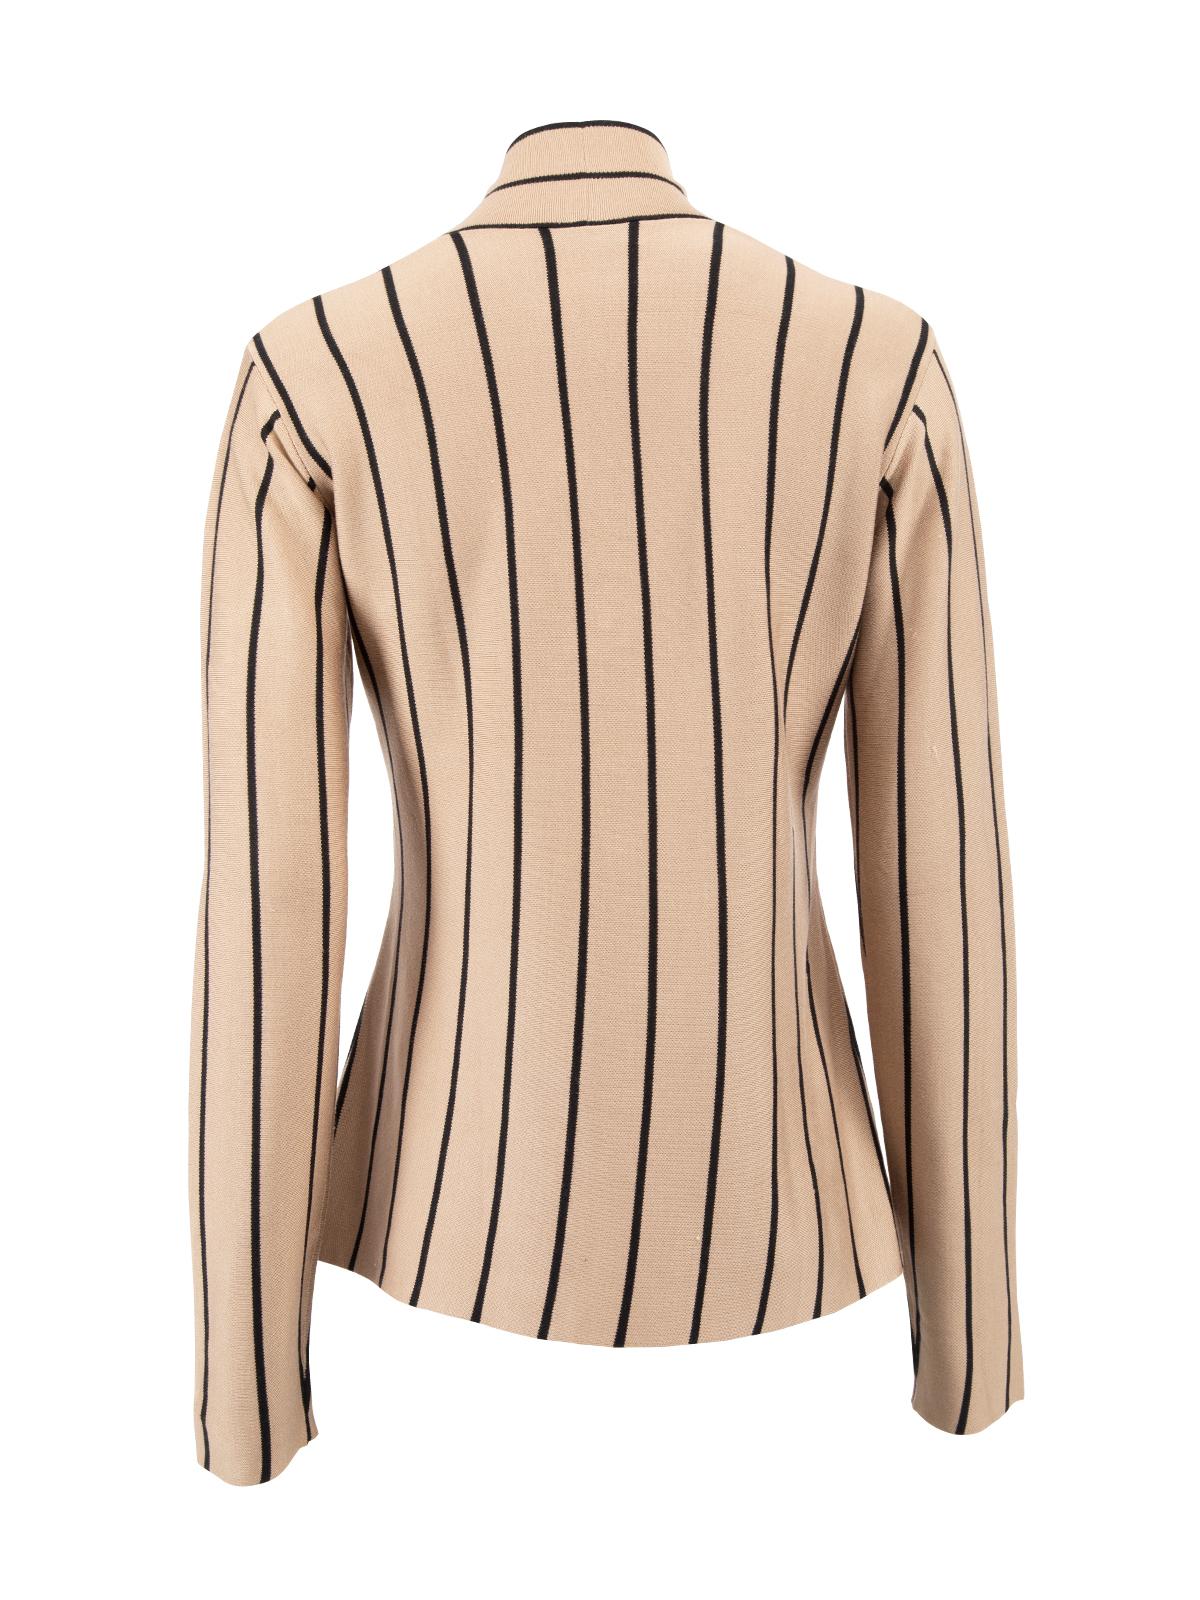 Pre-Loved Balenciaga Women's Brown Striped V Neck Top In Excellent Condition In London, GB